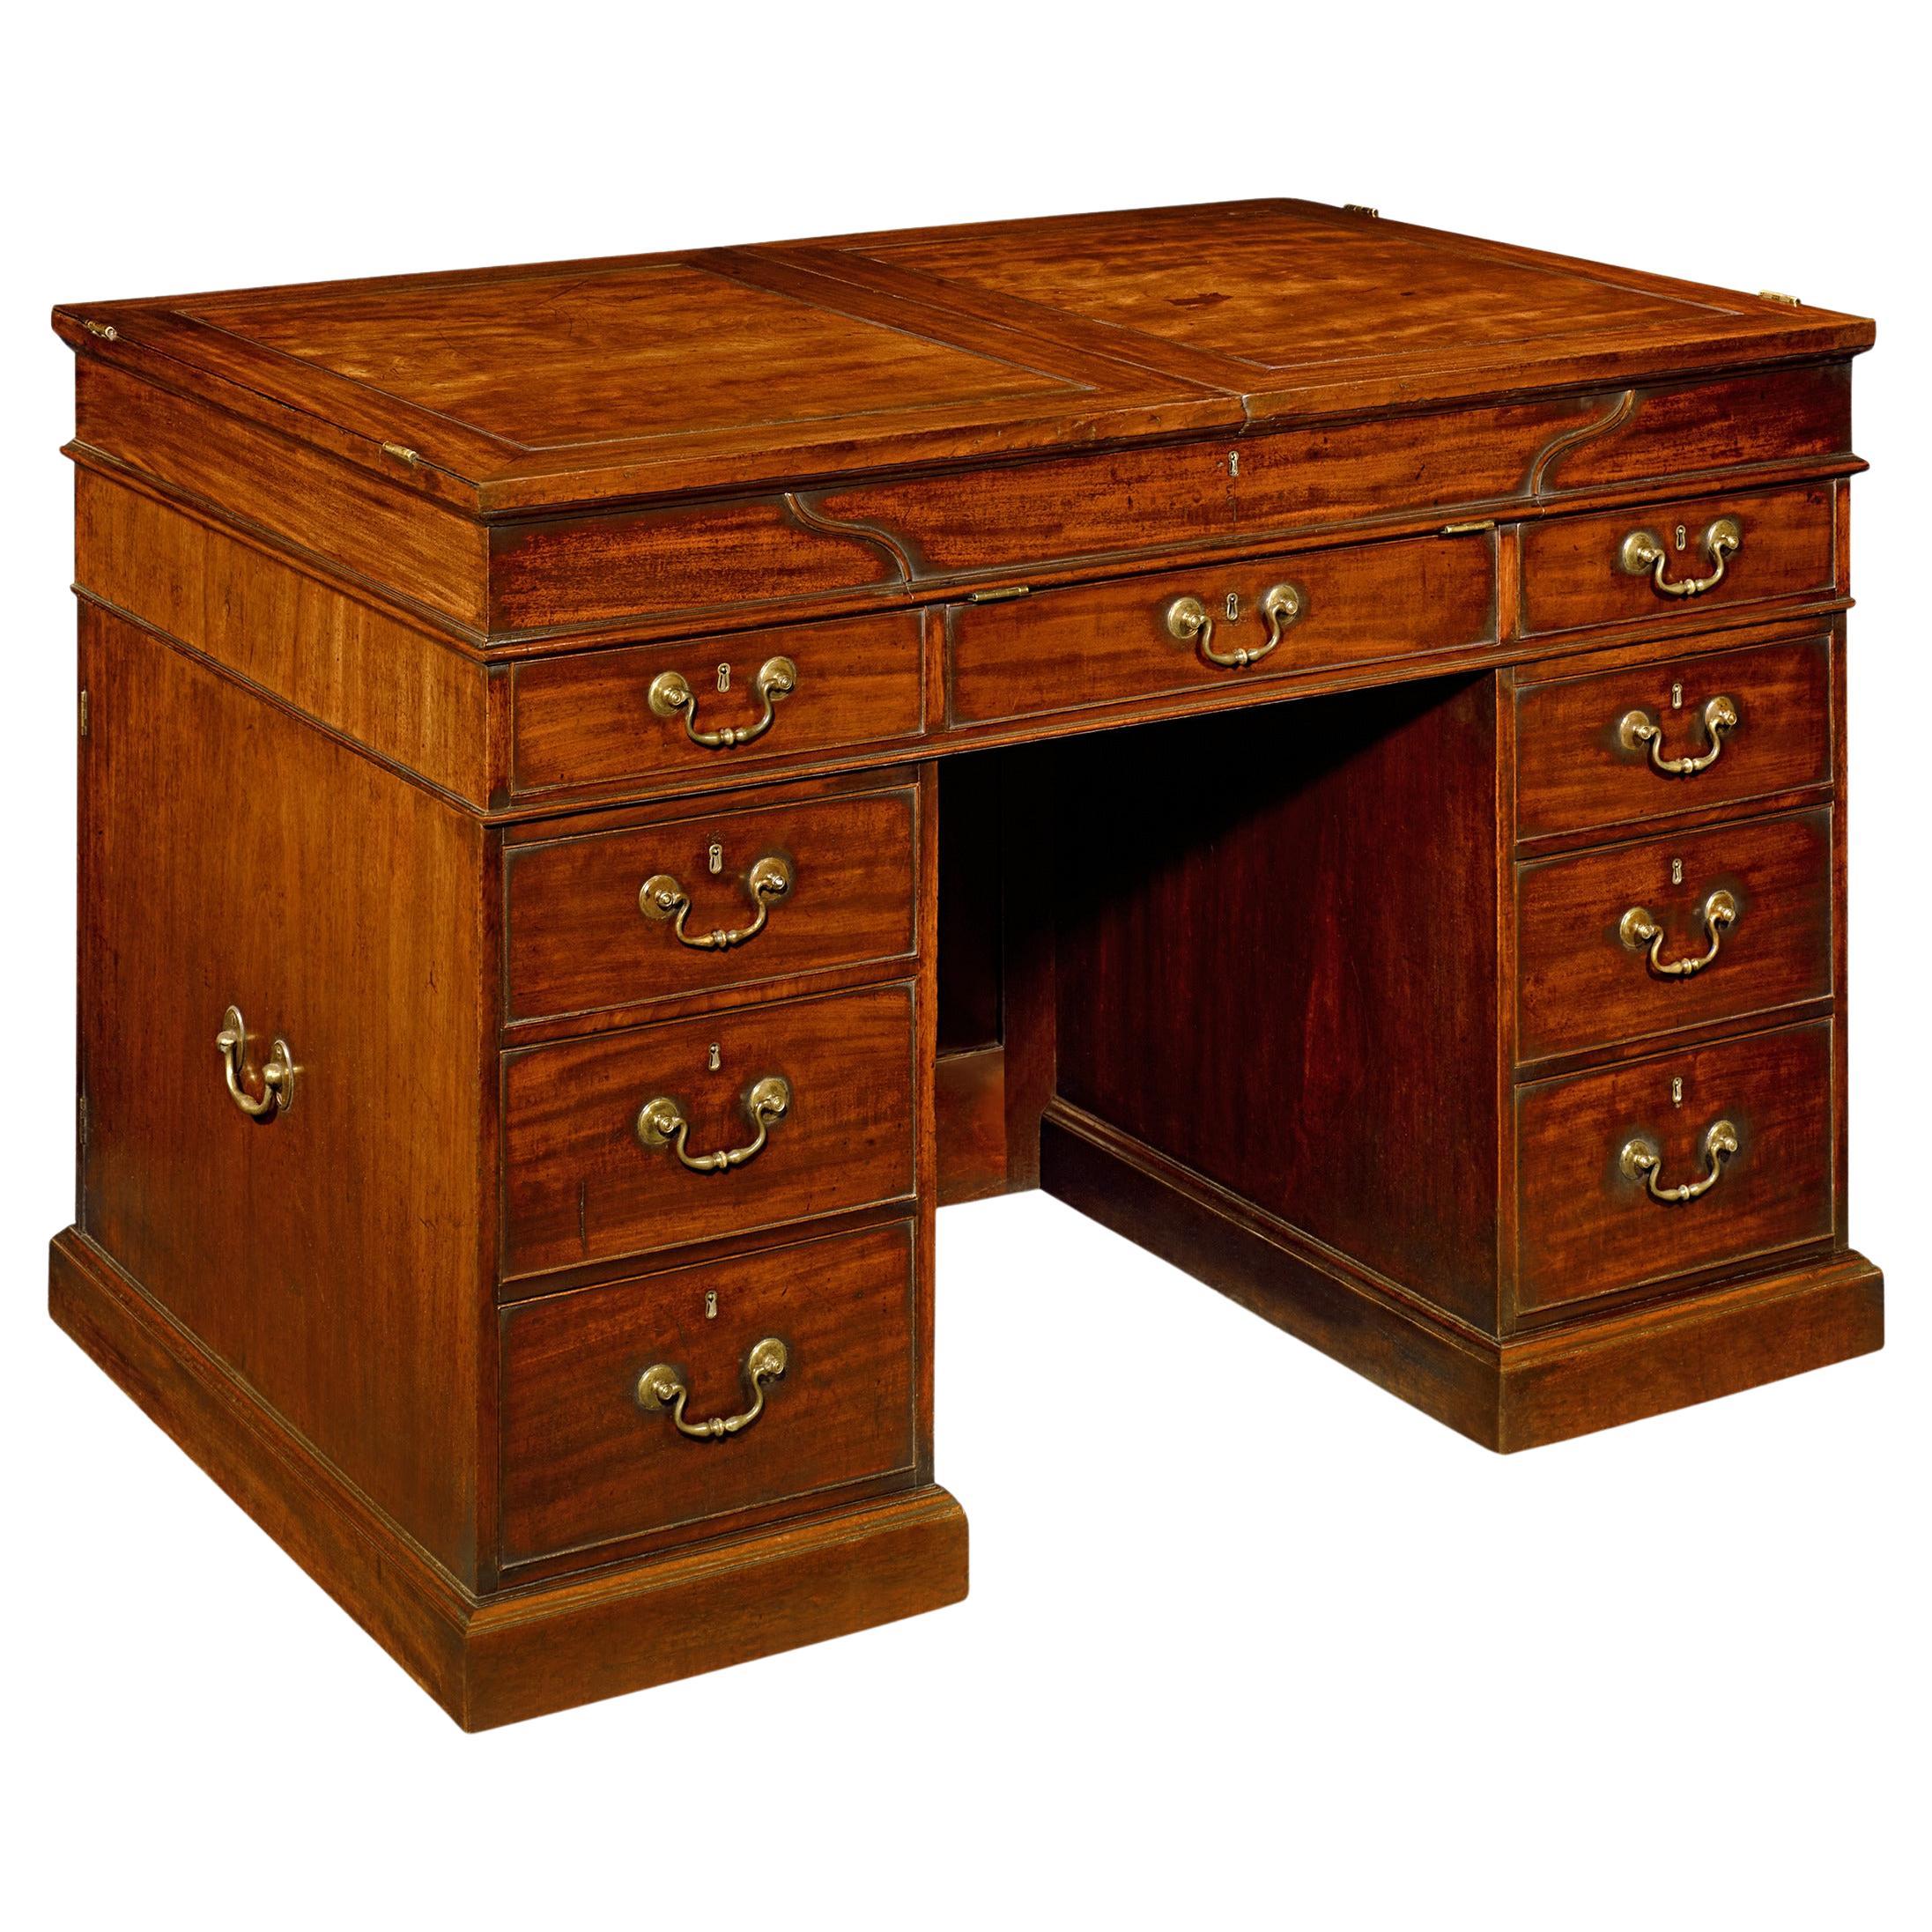 This writing desk from the highly esteemed Thomas Chippendale is exceptionally rare and unique. The renowned cabinetmaker was the first craftsman to exhibit such a strong following that an entire style bears his name and not that of a monarch. He